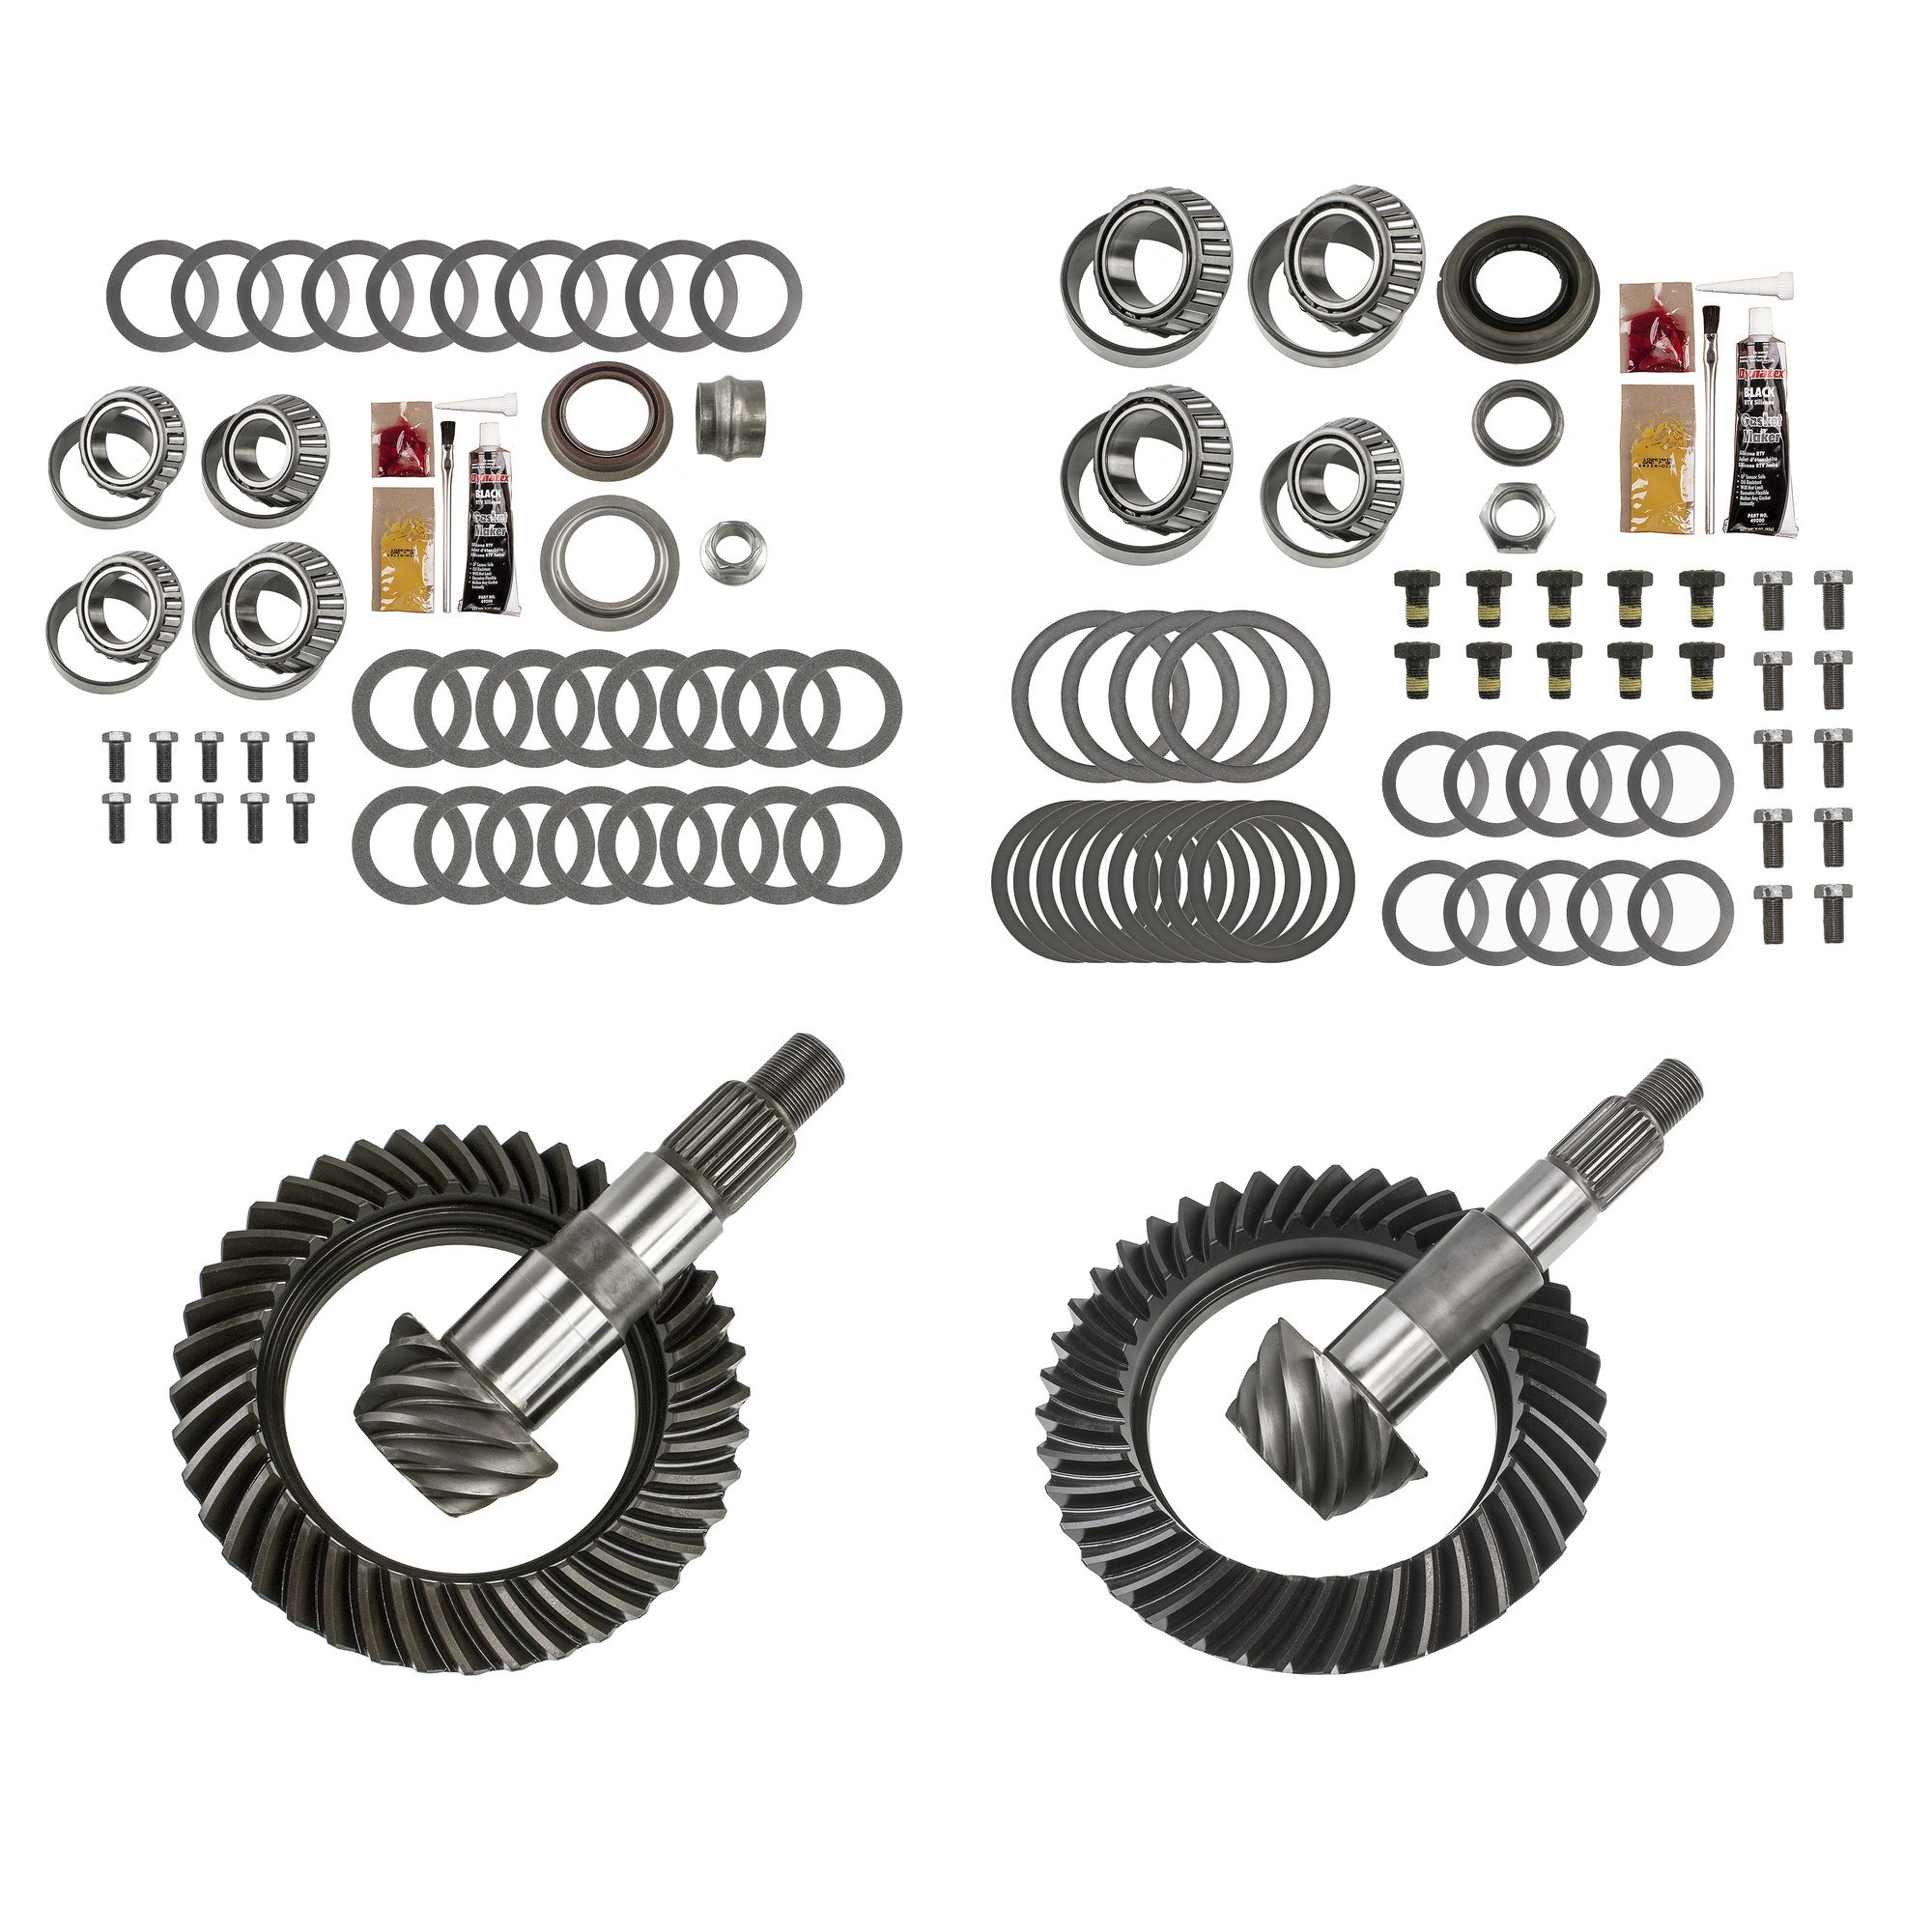 Motive Gear Front and Rear Ring and Pinion with Master Install Kits for  07-18 Jeep Wrangler JK with Dana 30 Front and Dana 44 Rear